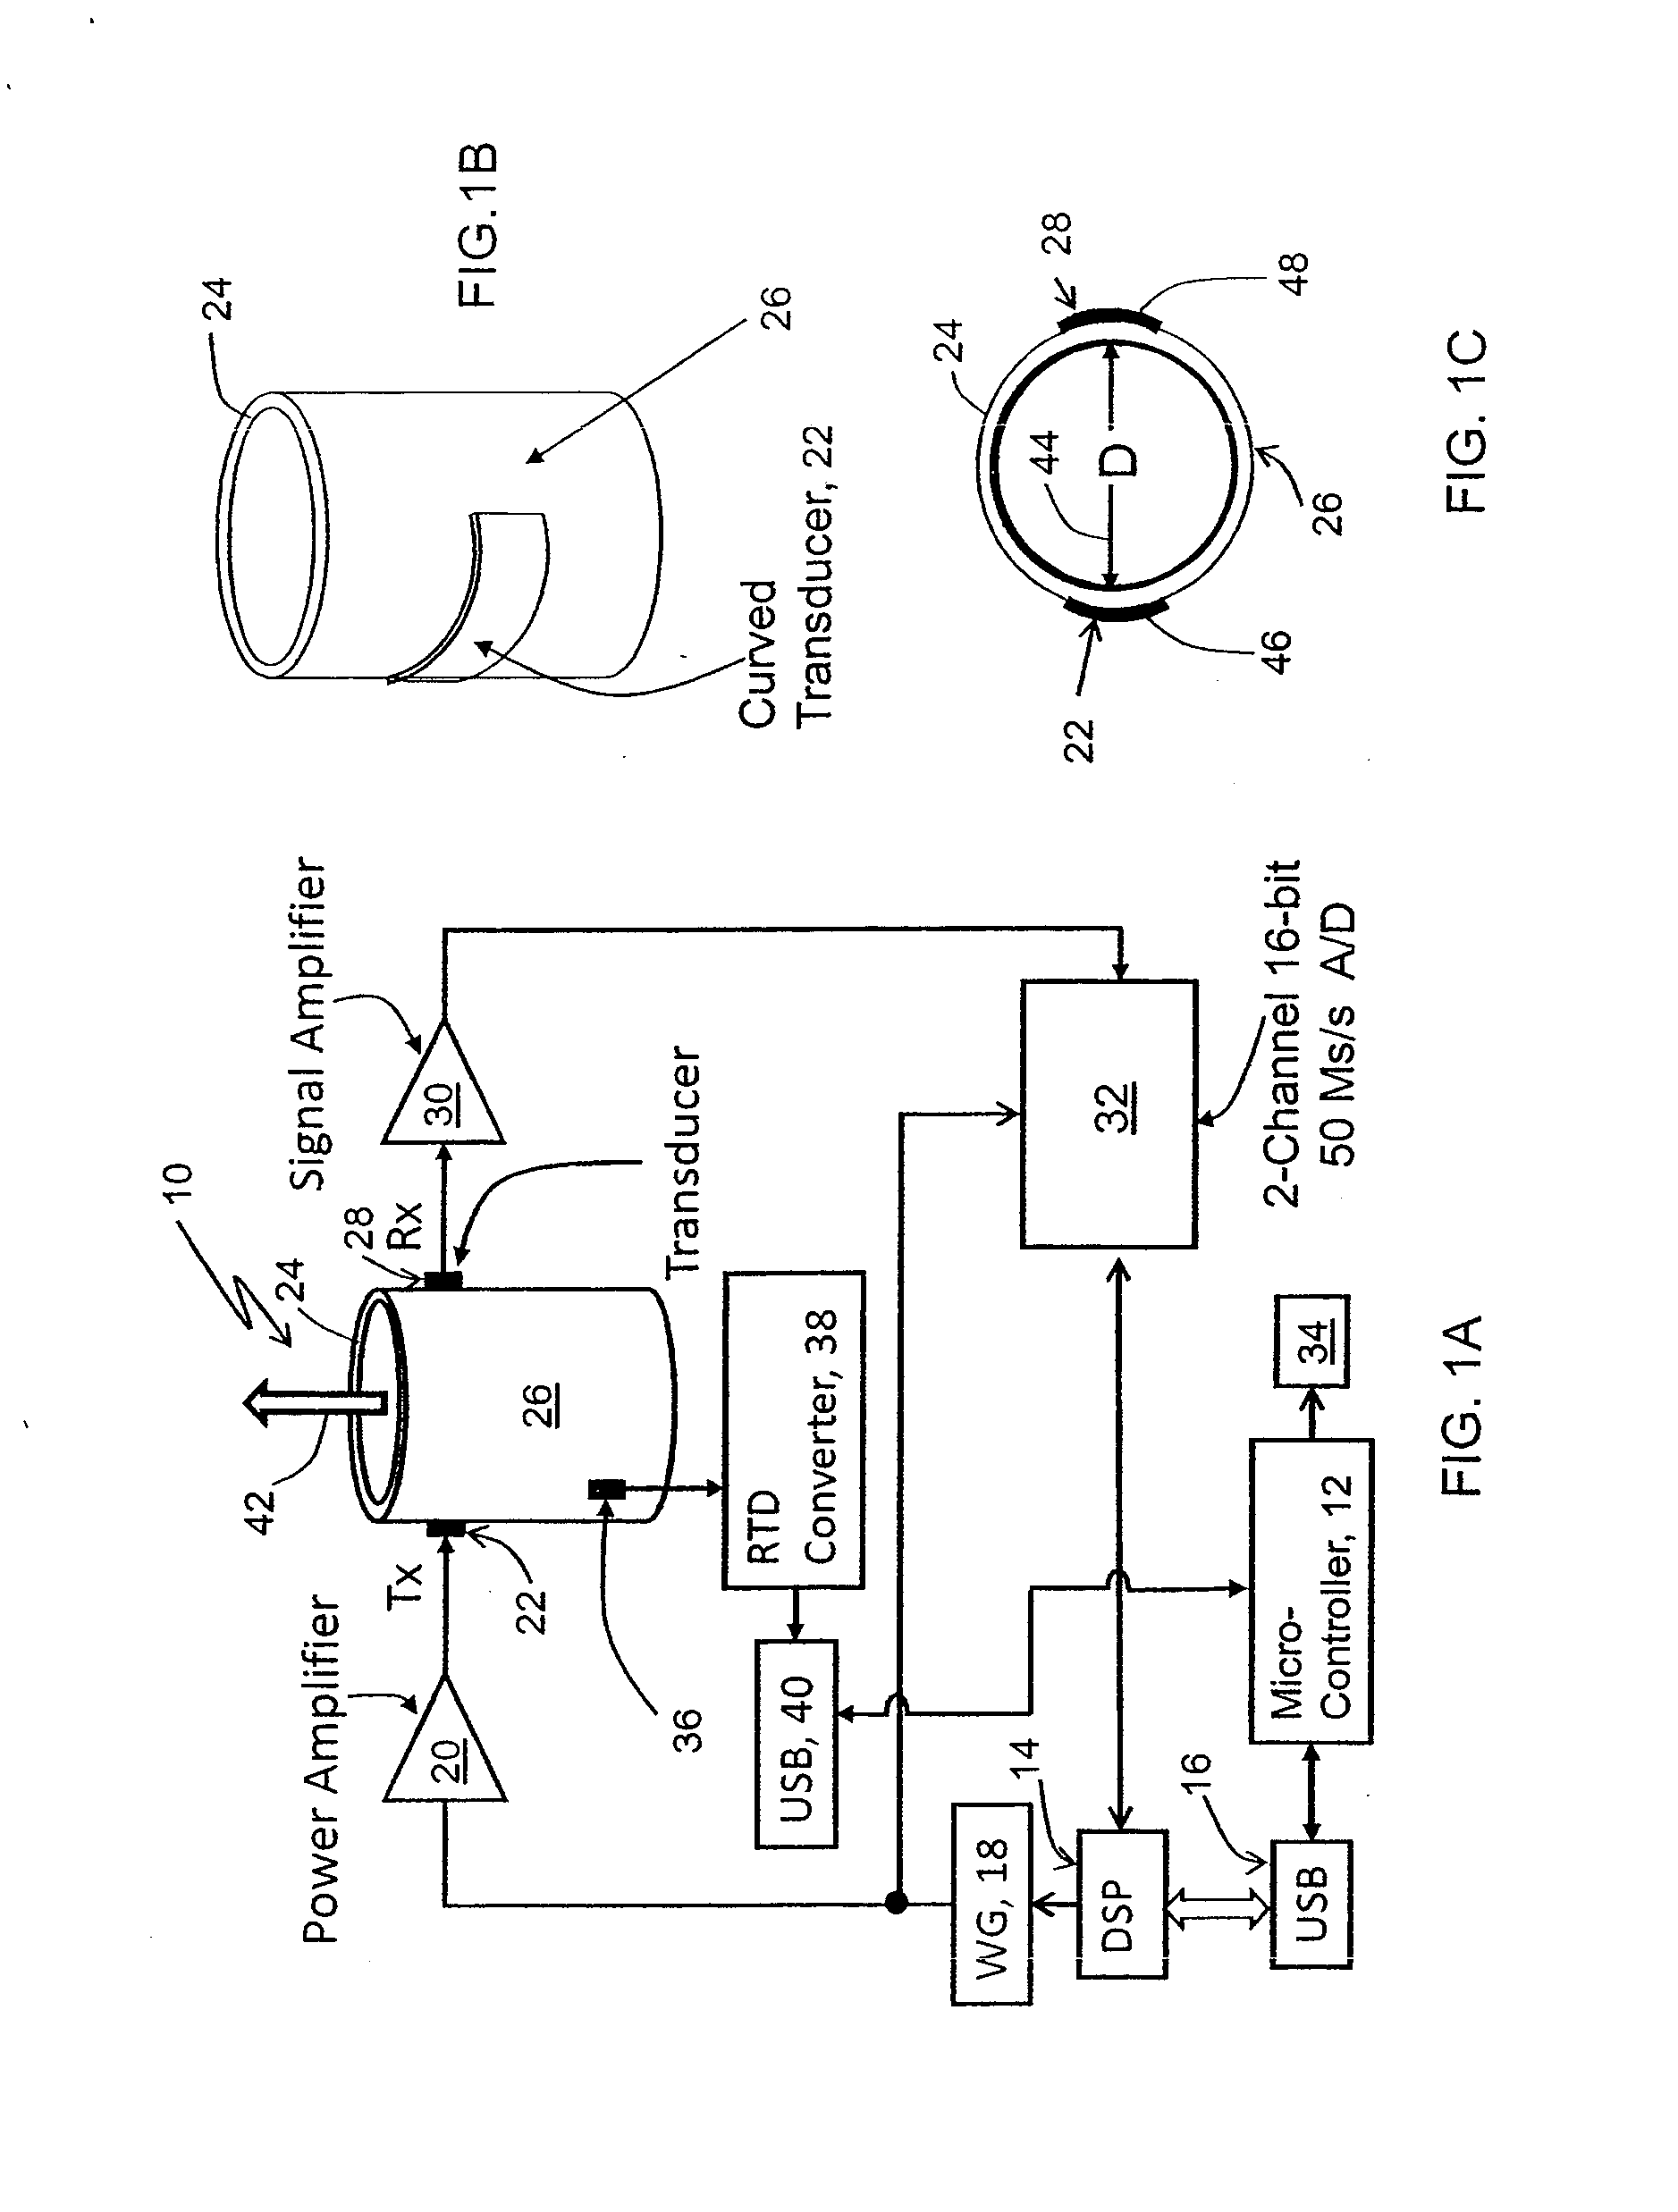 Method for noninvasive determination of acoustic properties of fluids inside pipes